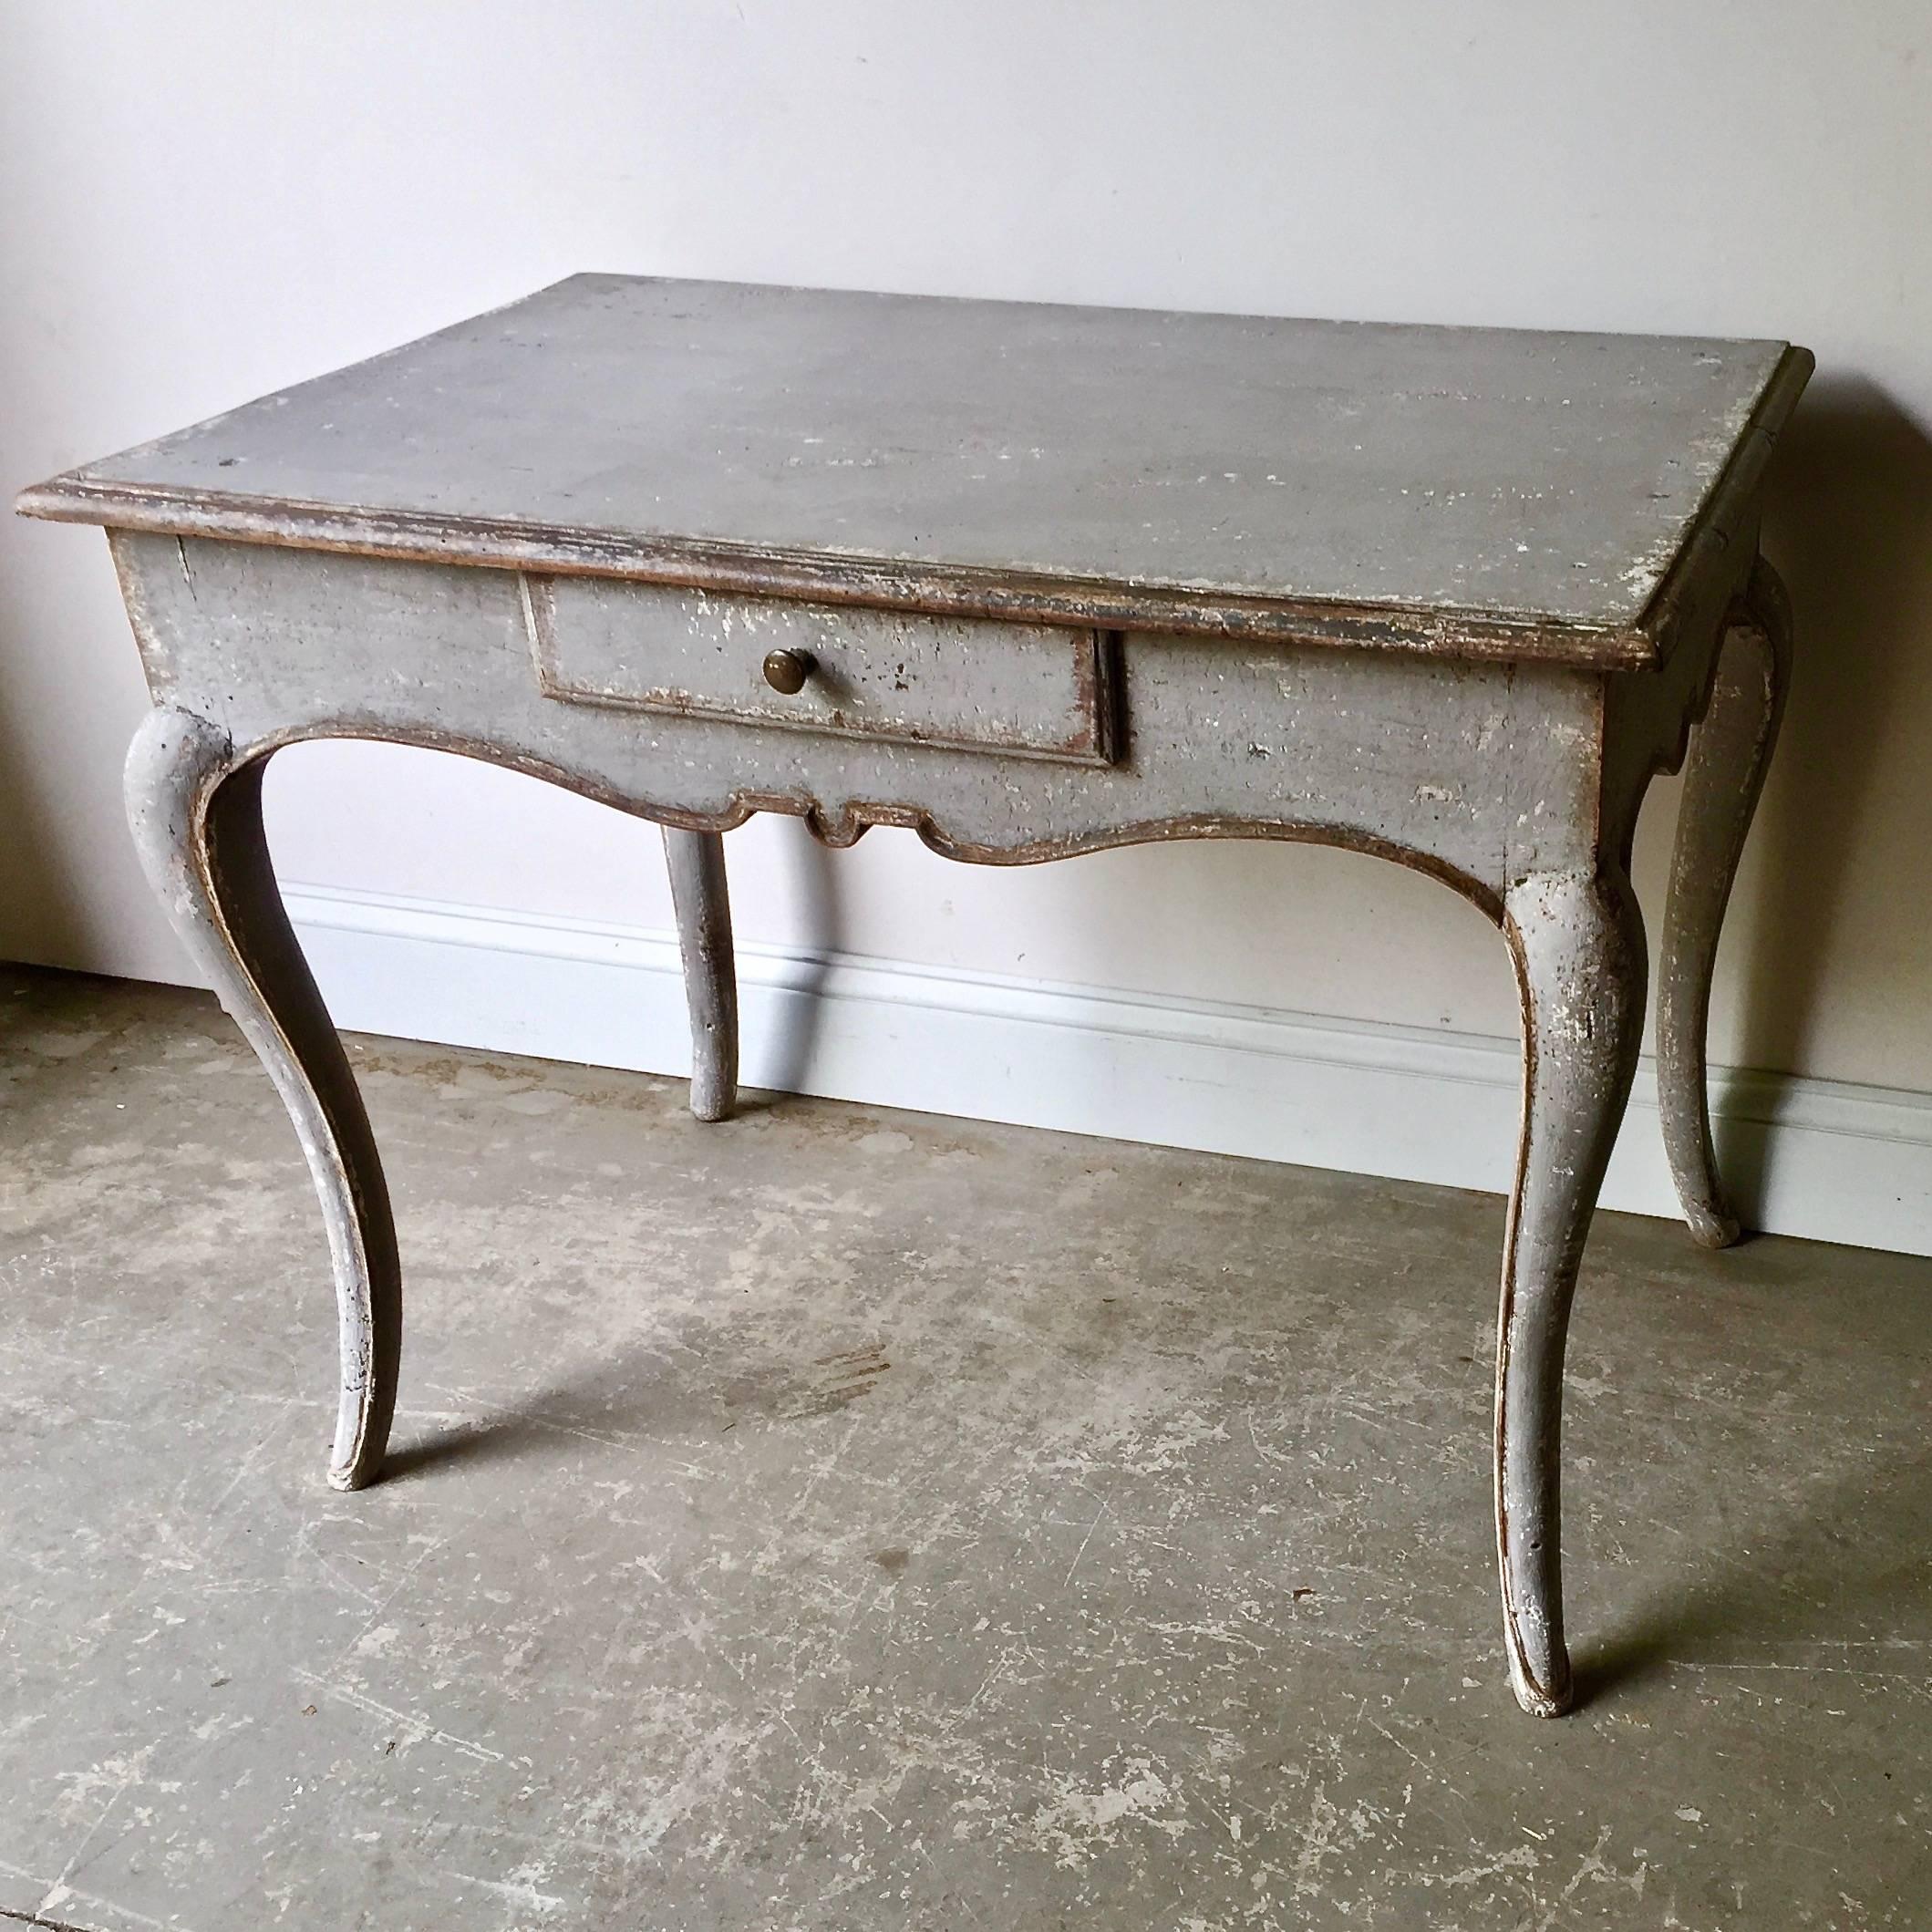 A charming 19th century French Louis XV style painted side table with beautifully carved apron and single drawer and elegant slender tapering cabriole legs, France, circa 1880.
Here are few examples … surprising pieces and objects, authentic,